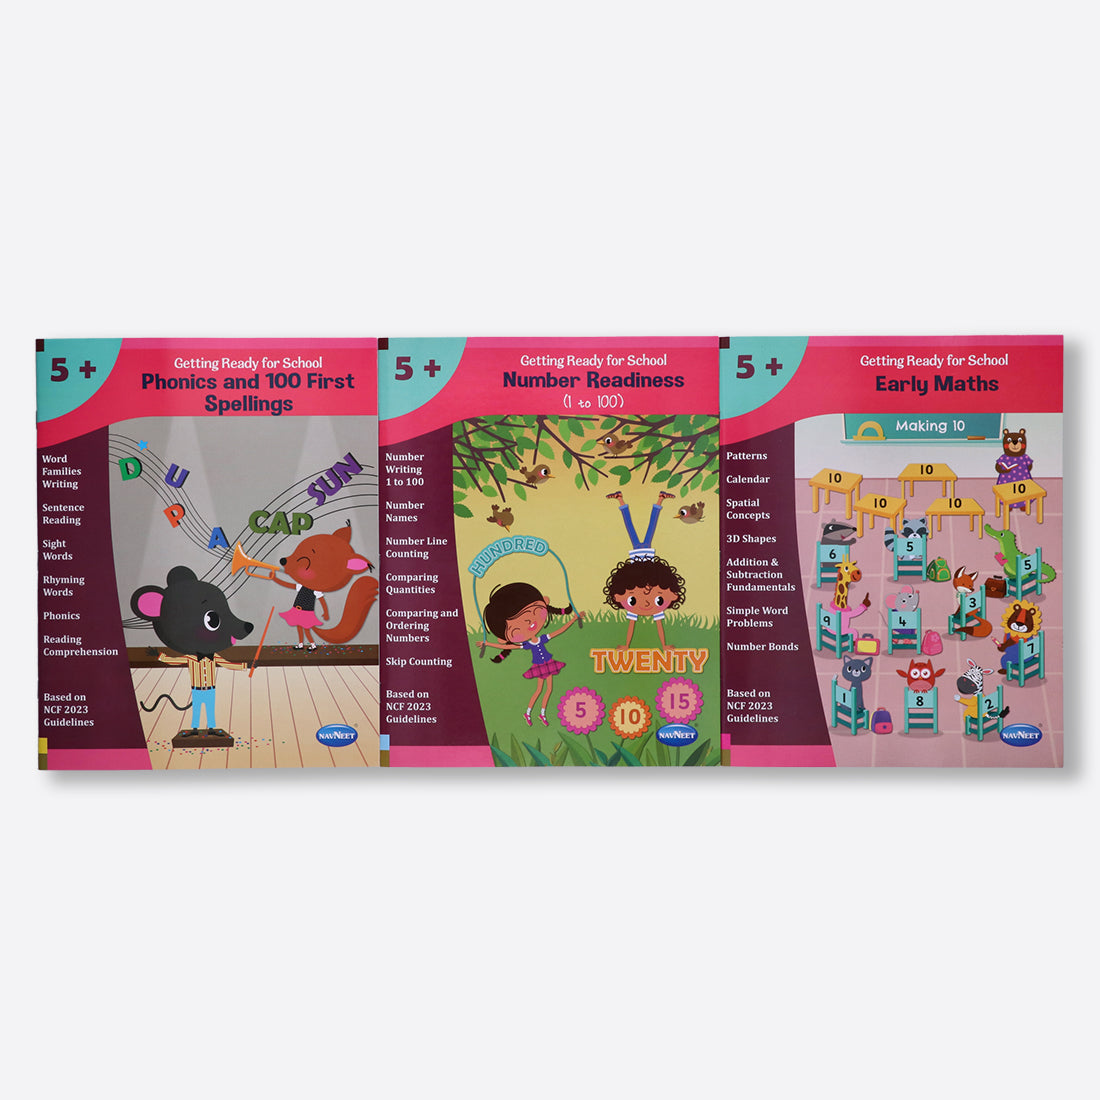 Navneet's Getting Ready for school 5+, Patterns, calendar,spatial concepts, 3D shapes, Addition & Subtraction Fundamentals, simple word Problems, Number Bonds